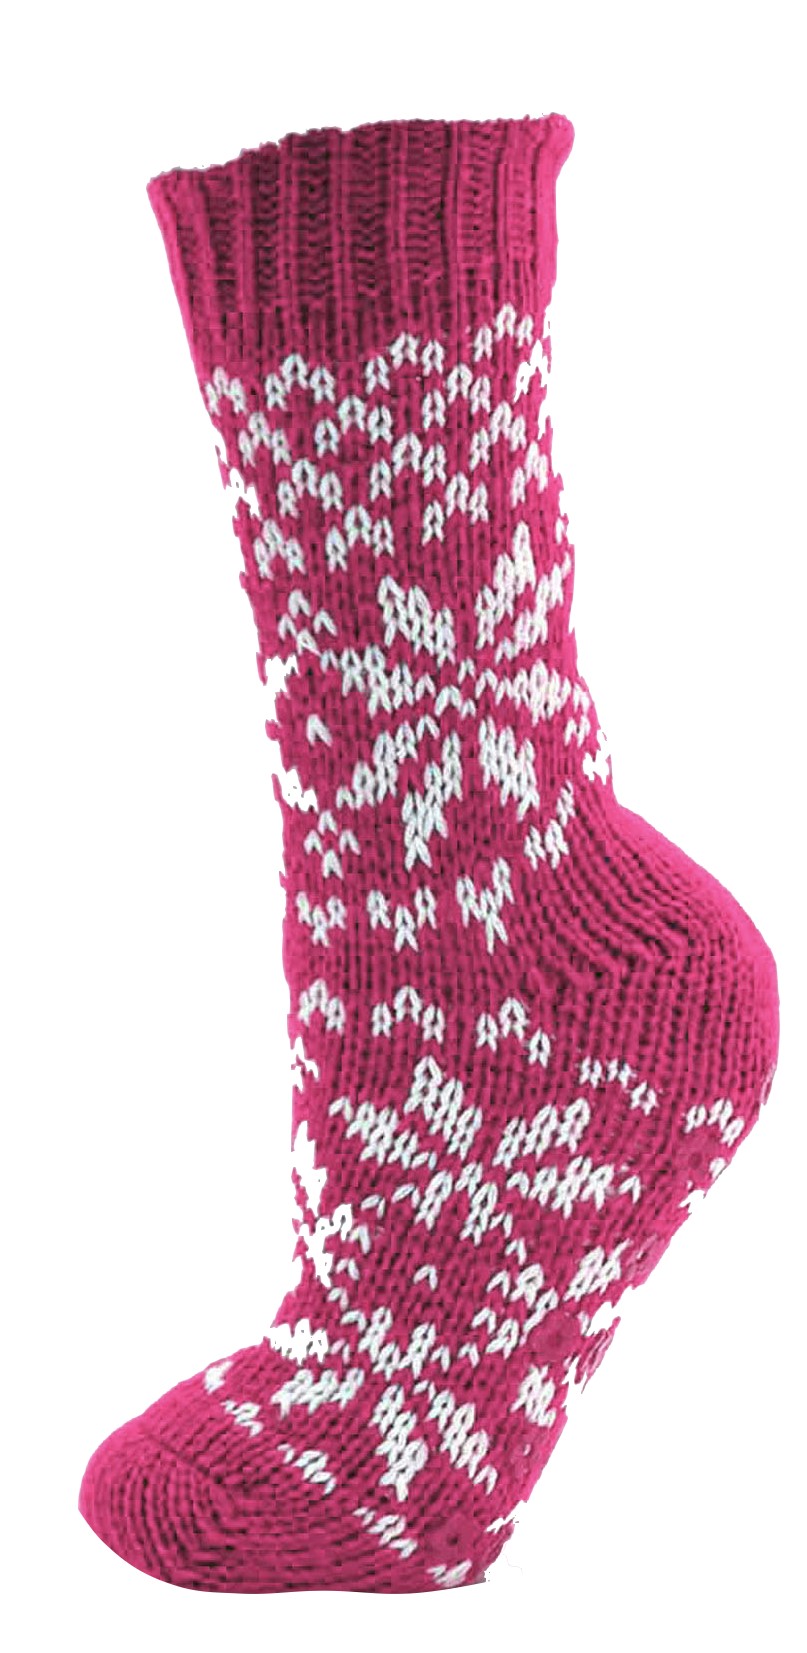 Ladies Knitted Socks SK248A Pink.jpg  by Thingimijigs